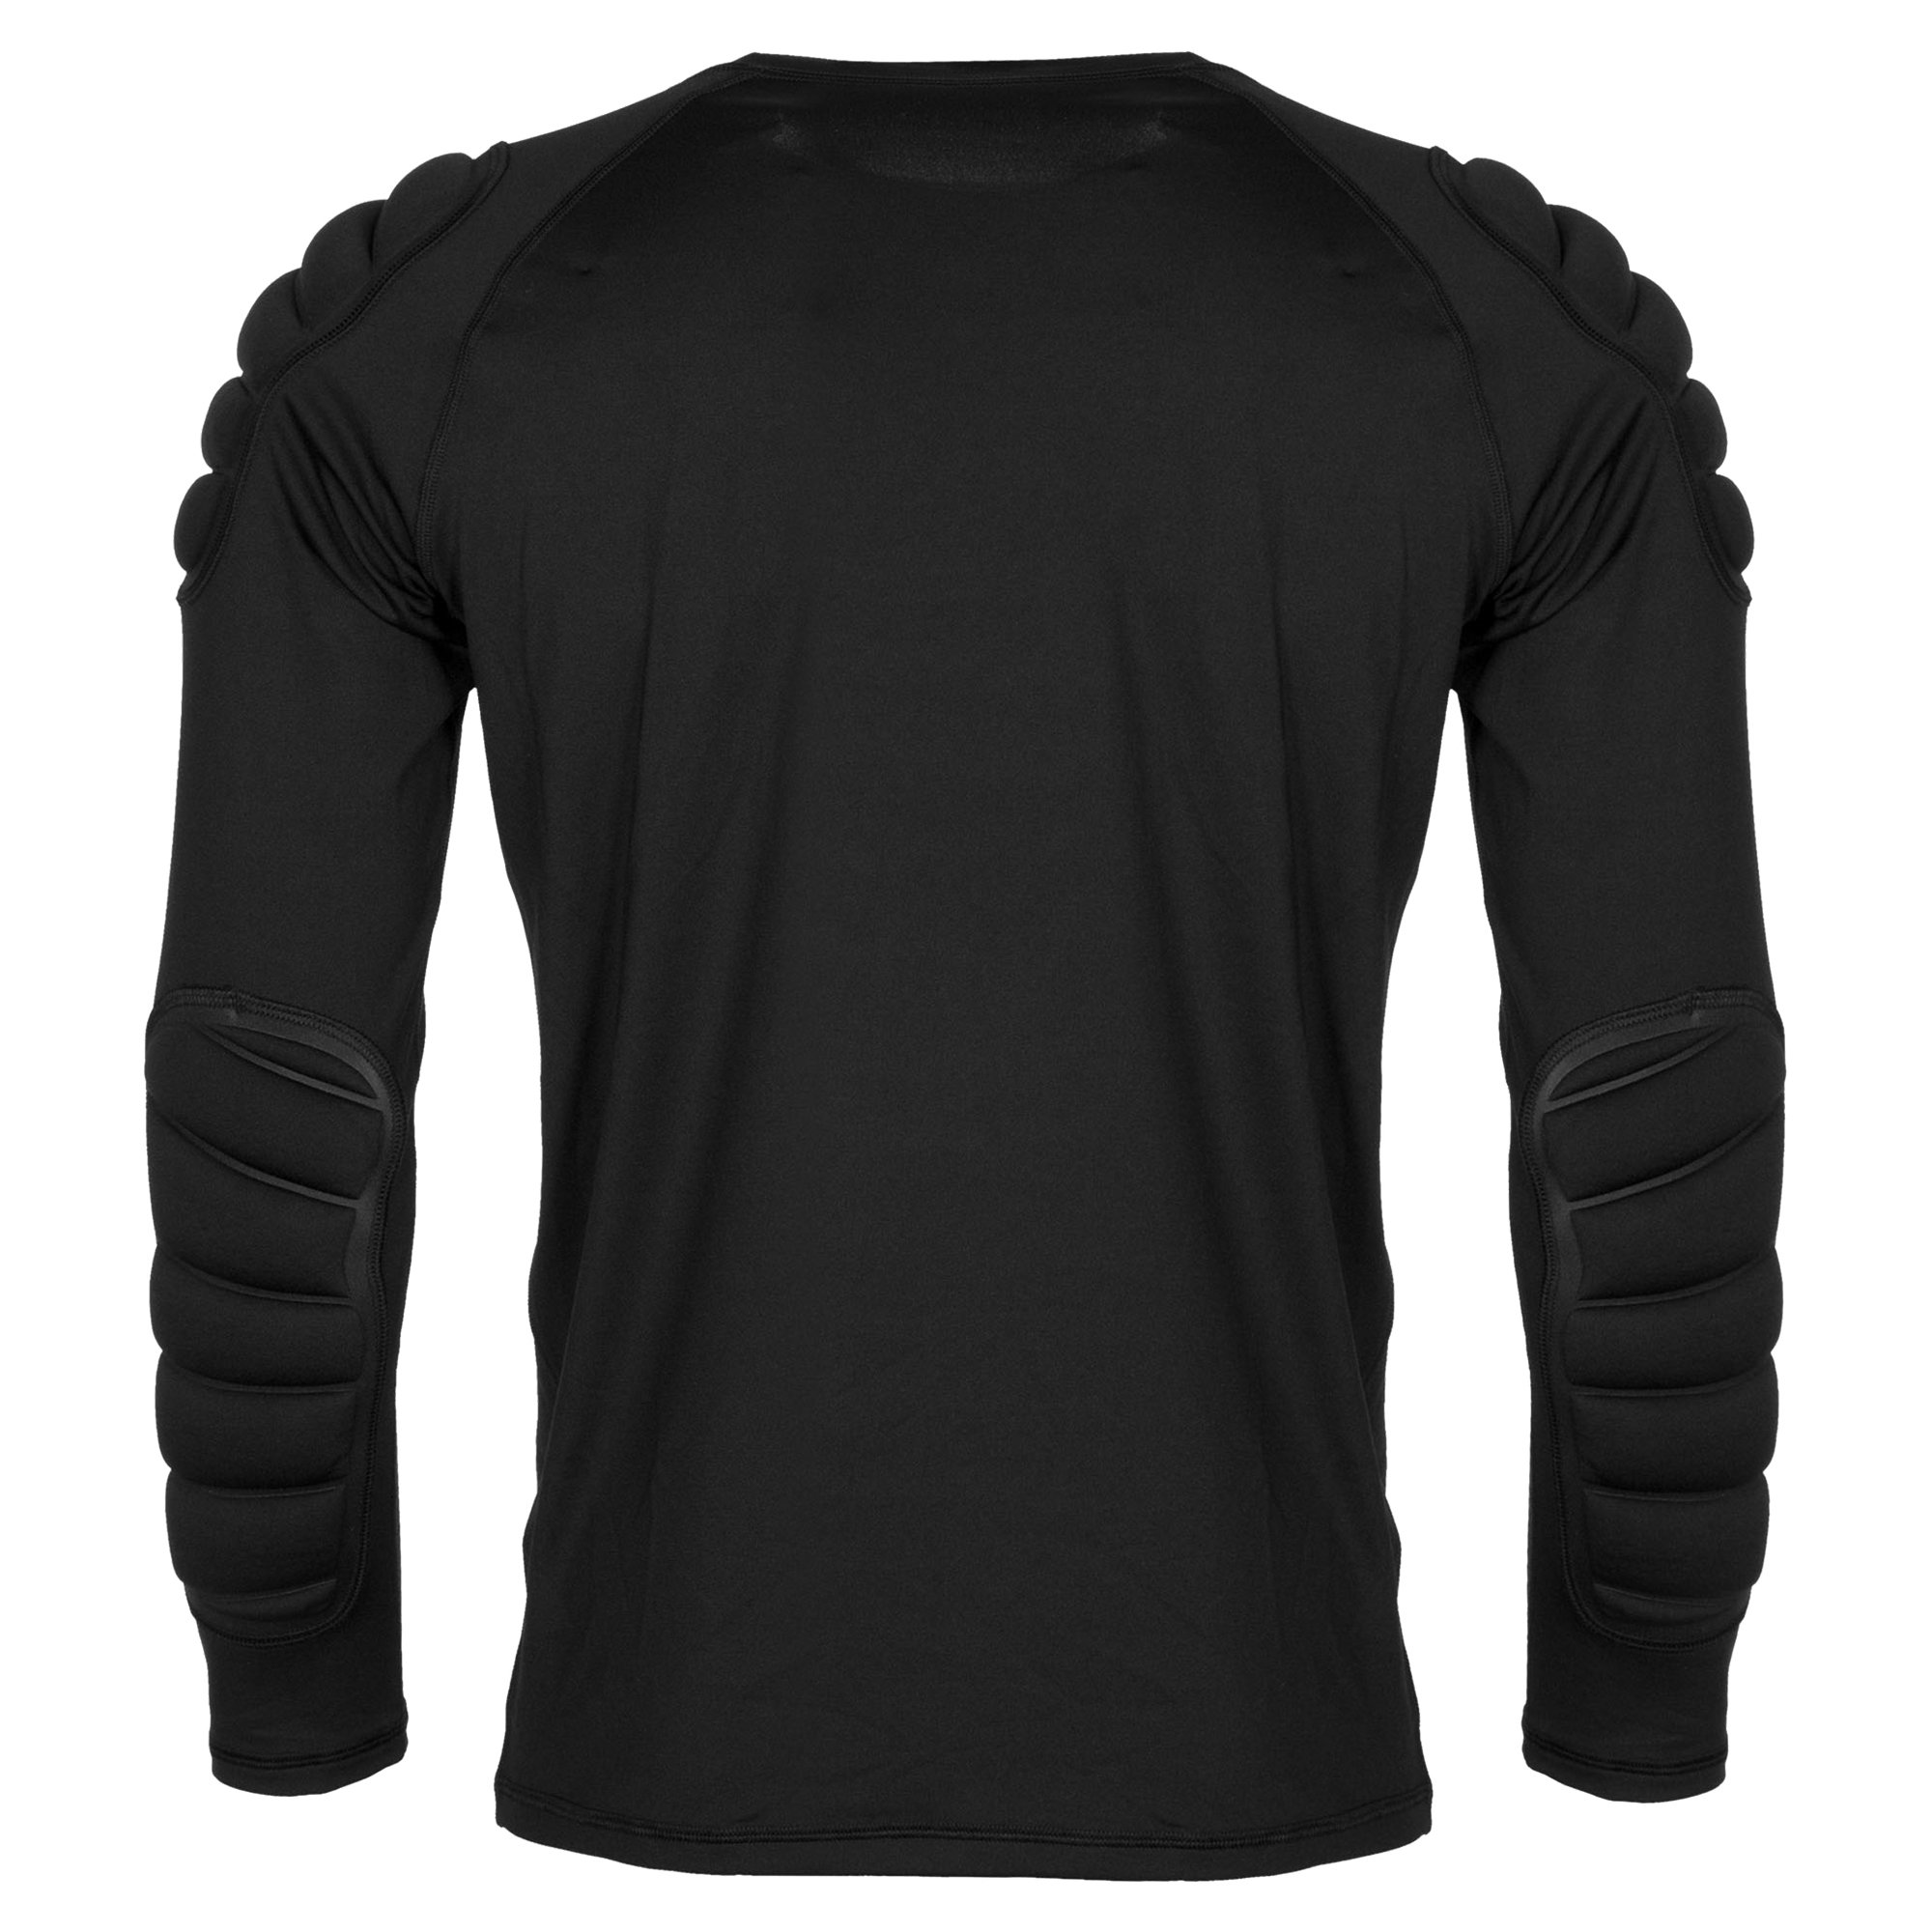 Stanno Protection Shirt